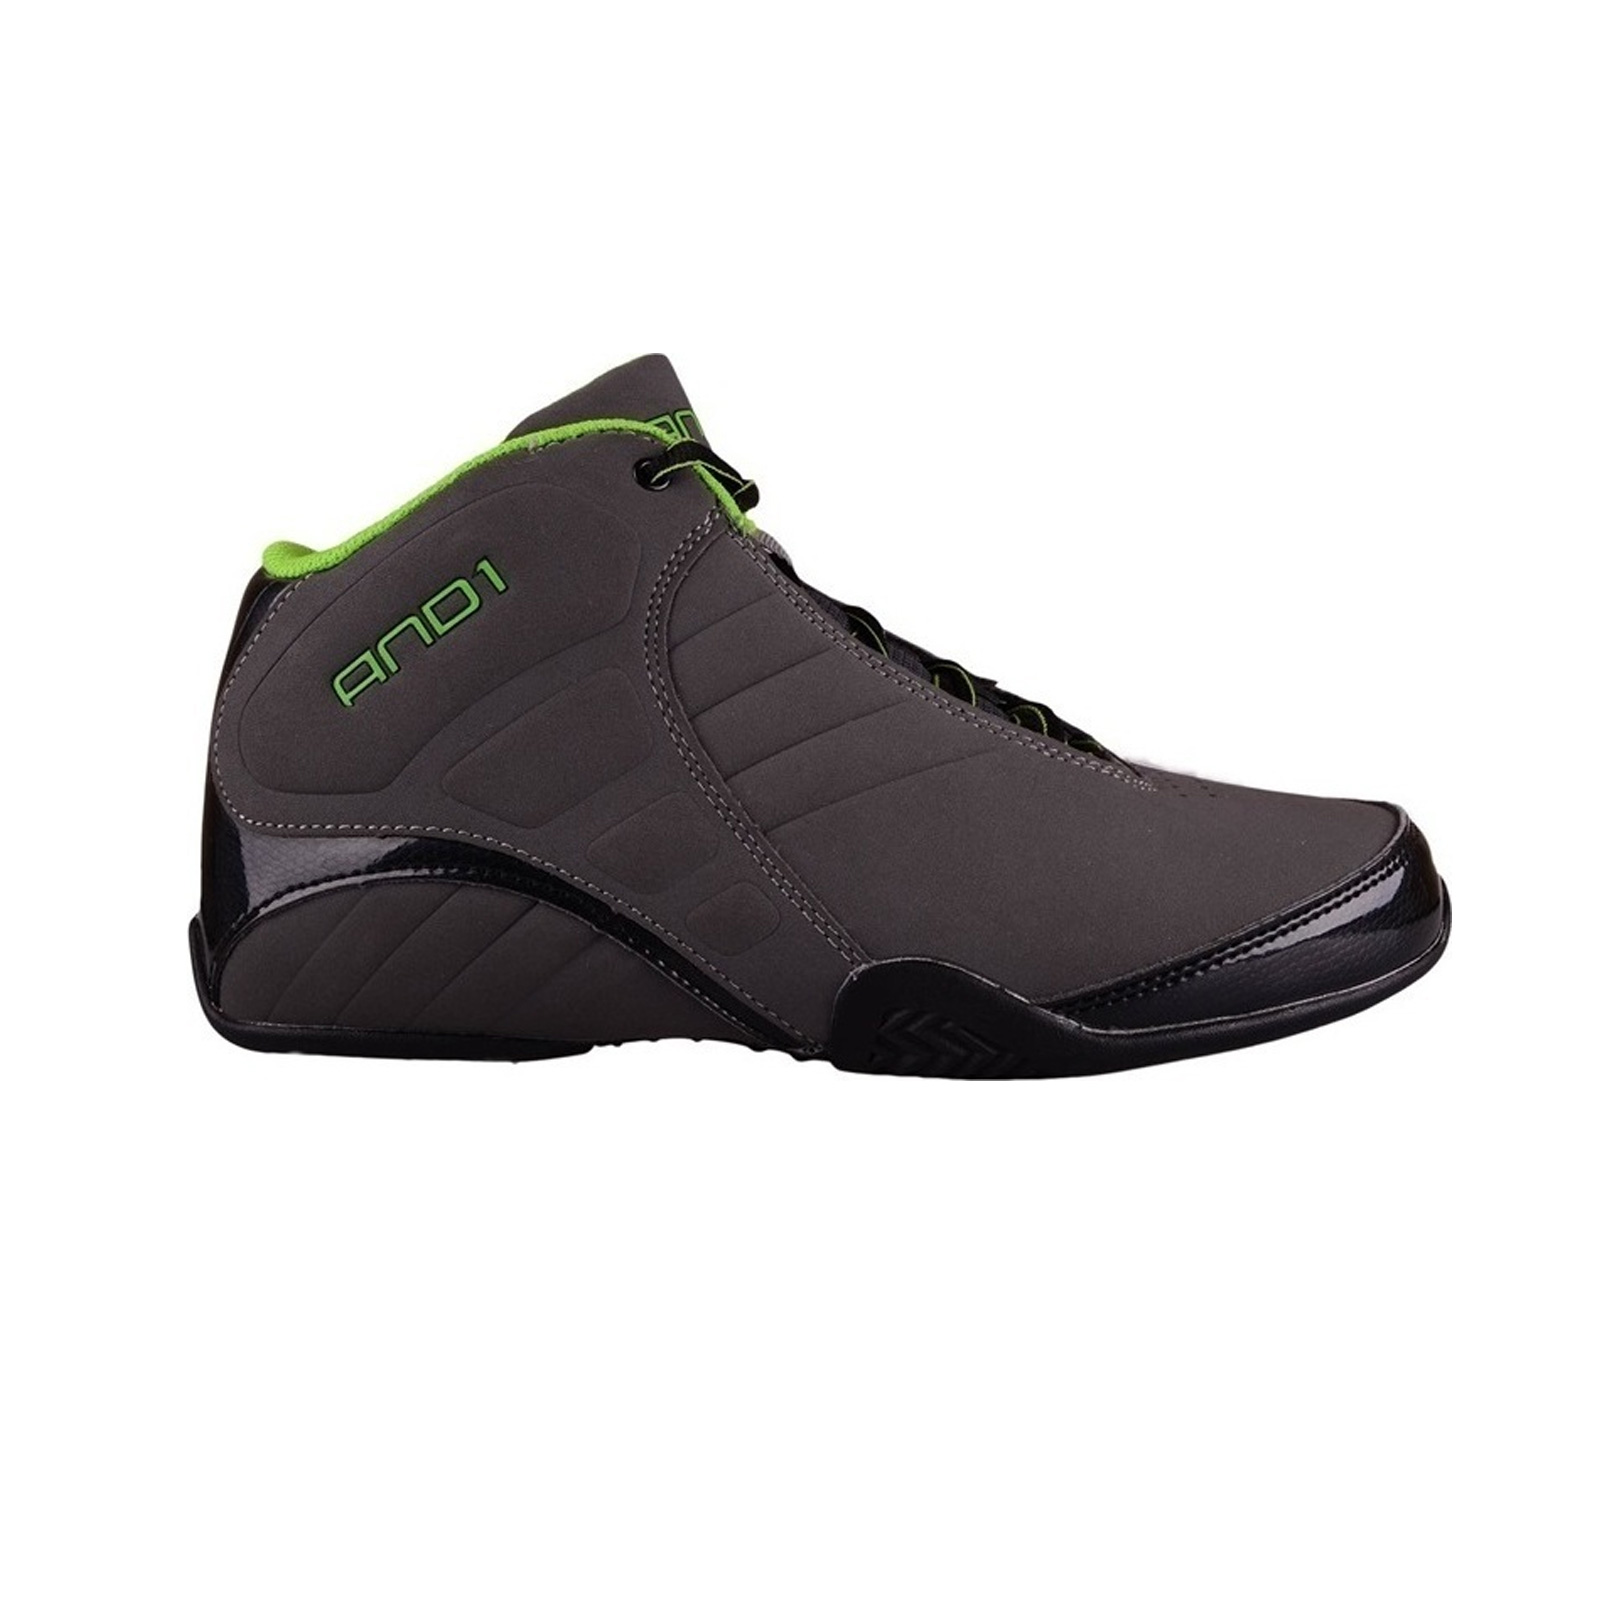 And1 - SHOES KIDS ROCKET 3,0 NEW - VBK Παιδικά > Παπούτσια > Αθλητικά > Παπούτσι Mid Cut